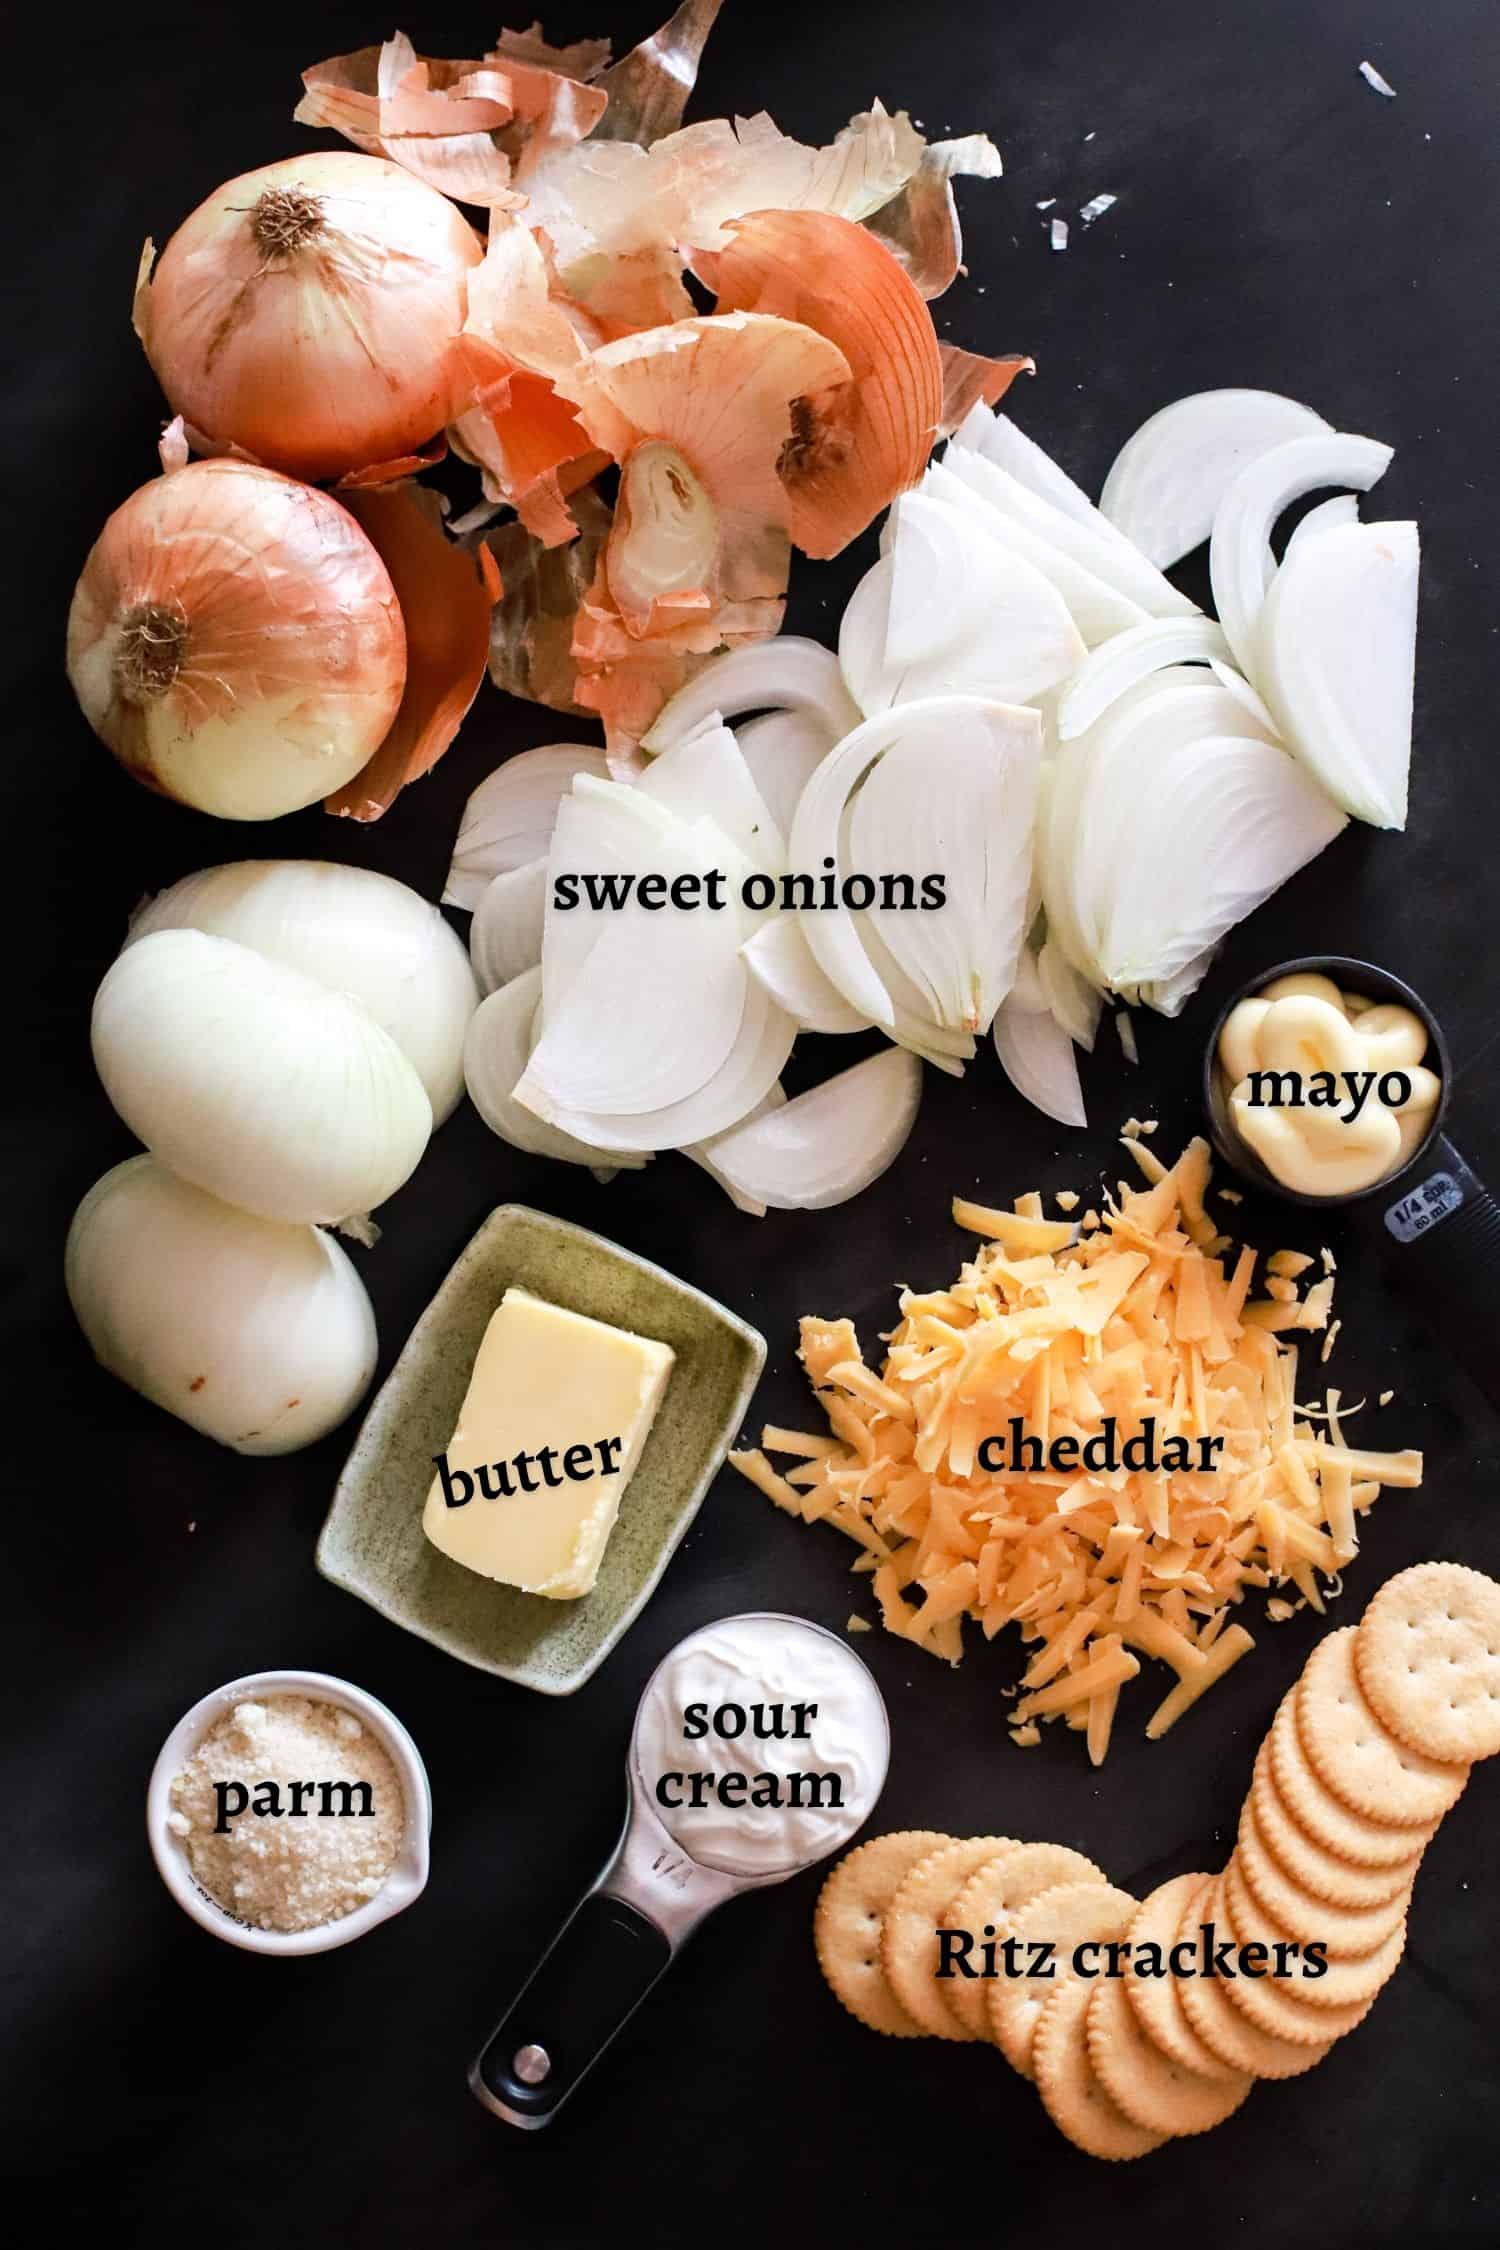 sweet onion casserole ingredients with text labels.